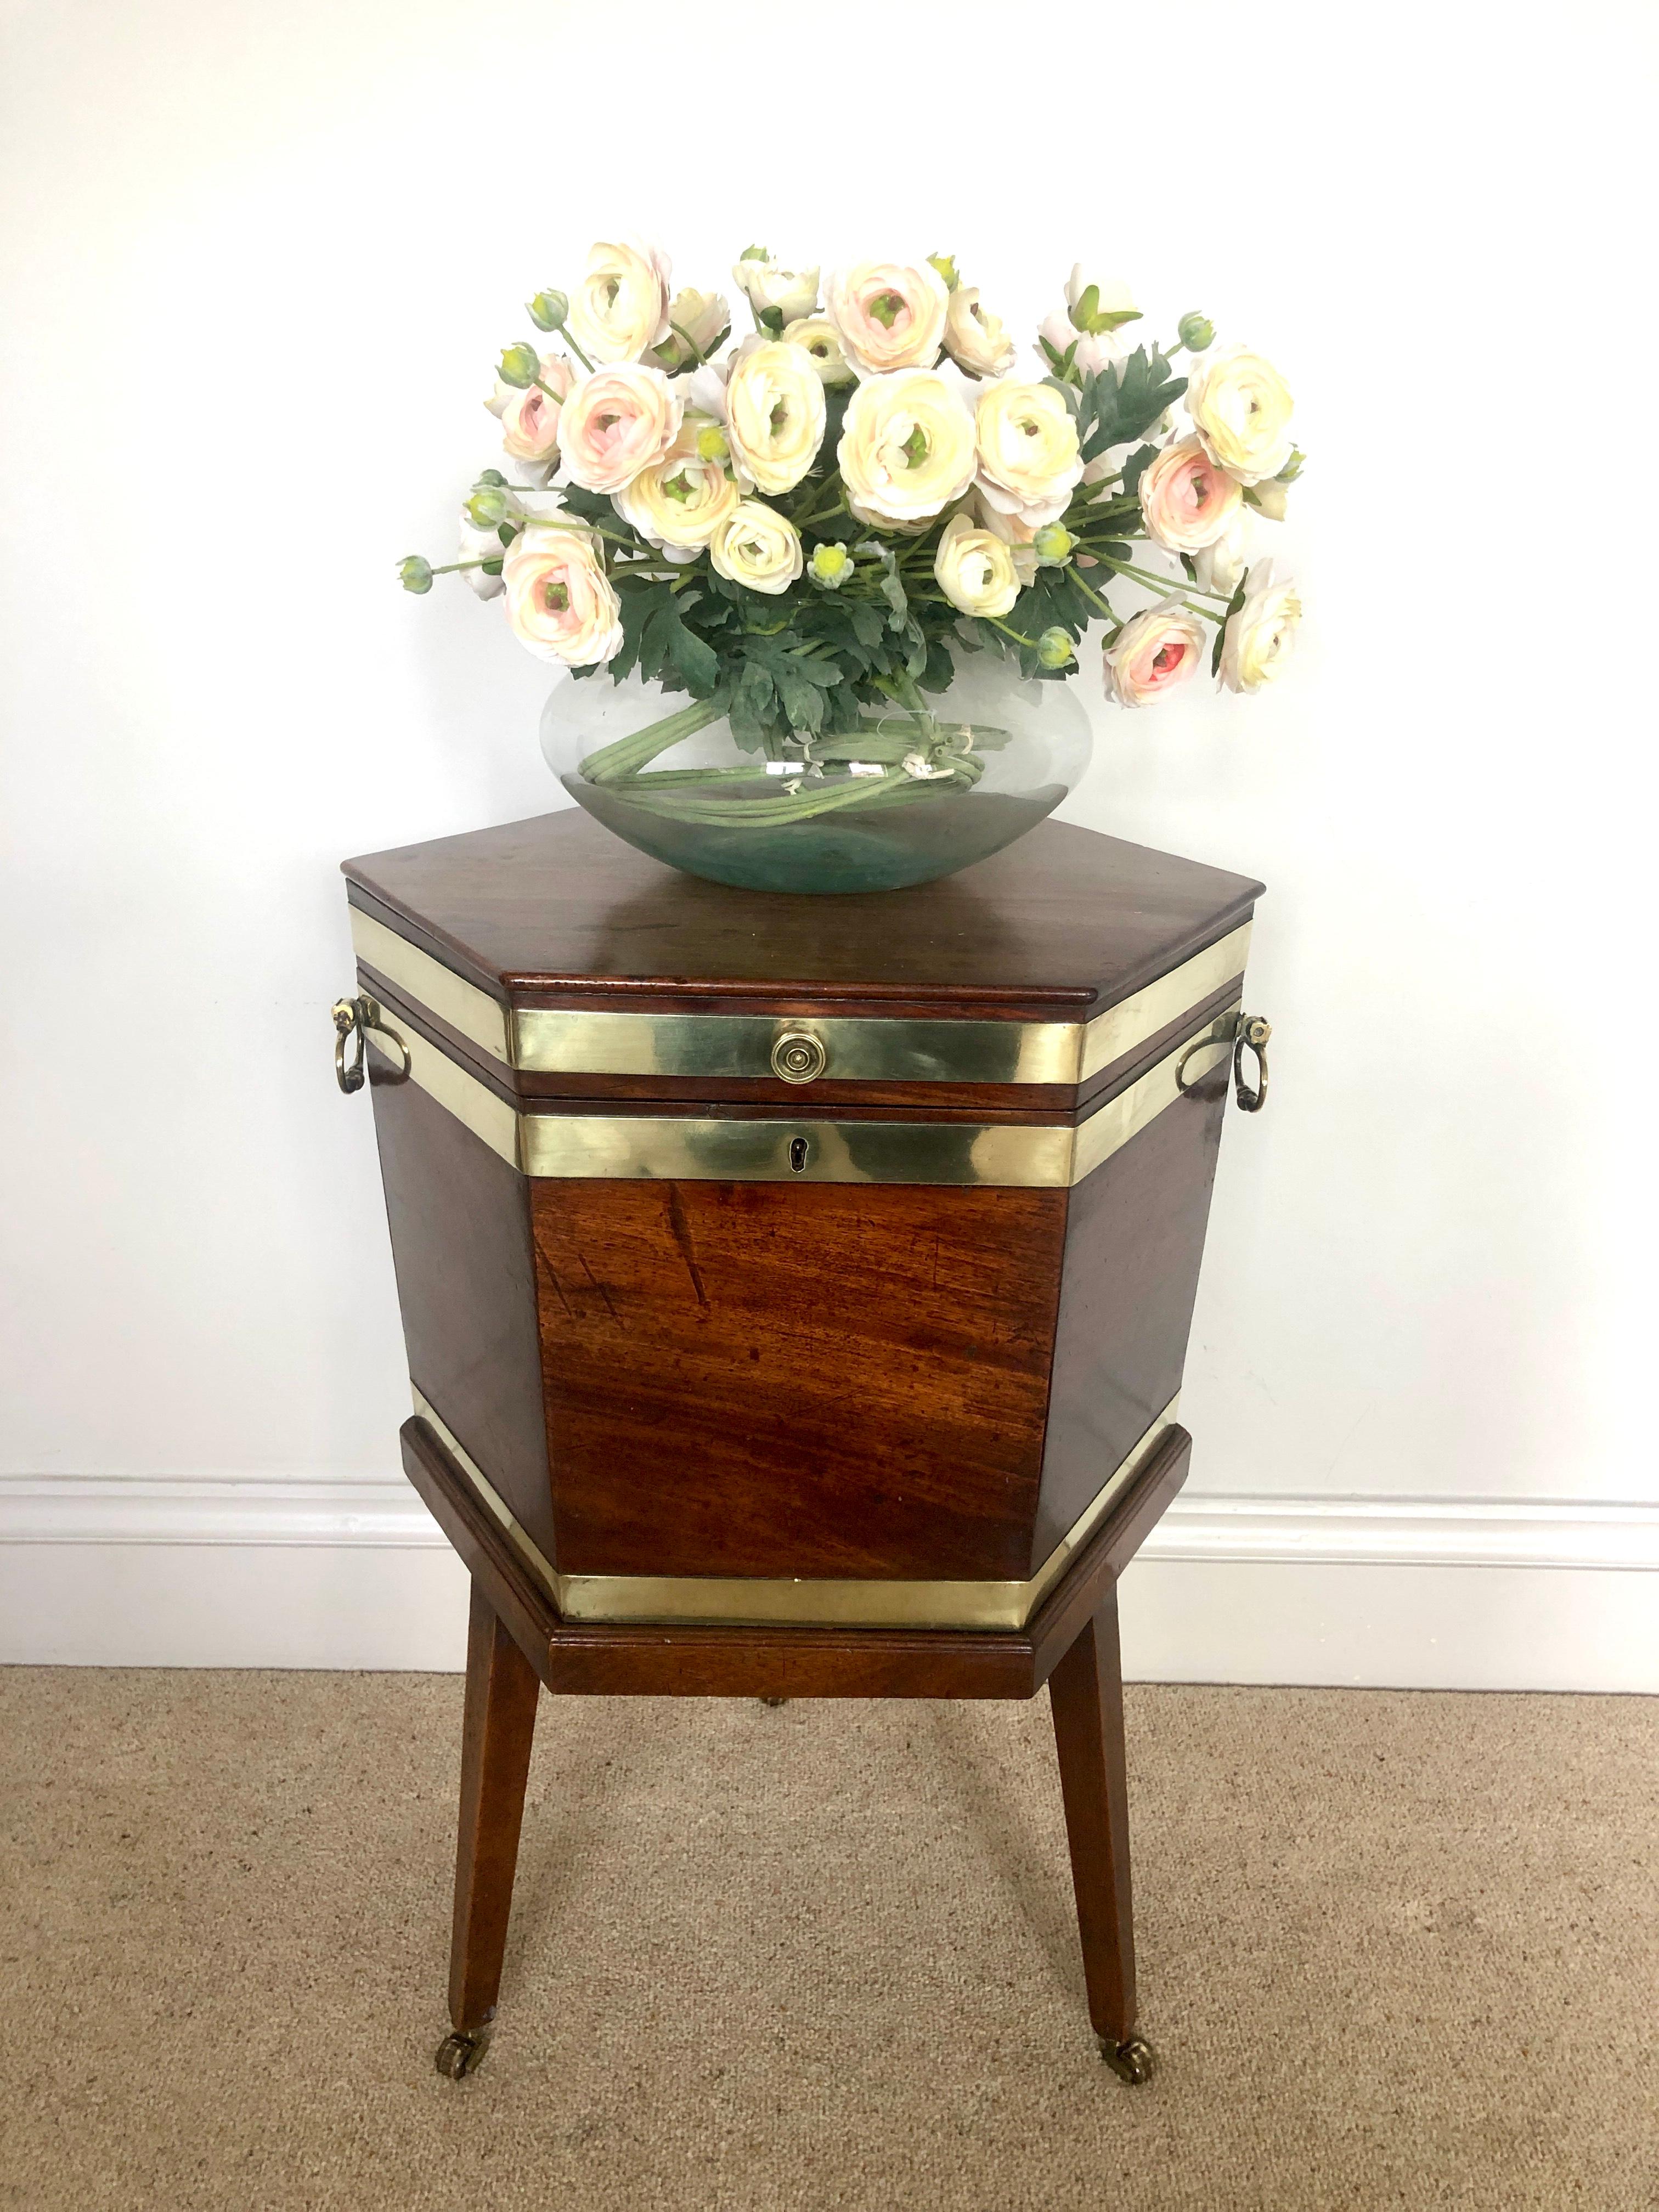 Fine antique George III mahogany brass bound wine cooler having the three original brass bands, two original carrying handles and original brass knob. The quality mahogany top lifts up to reveal the original lead lined interior raised on the